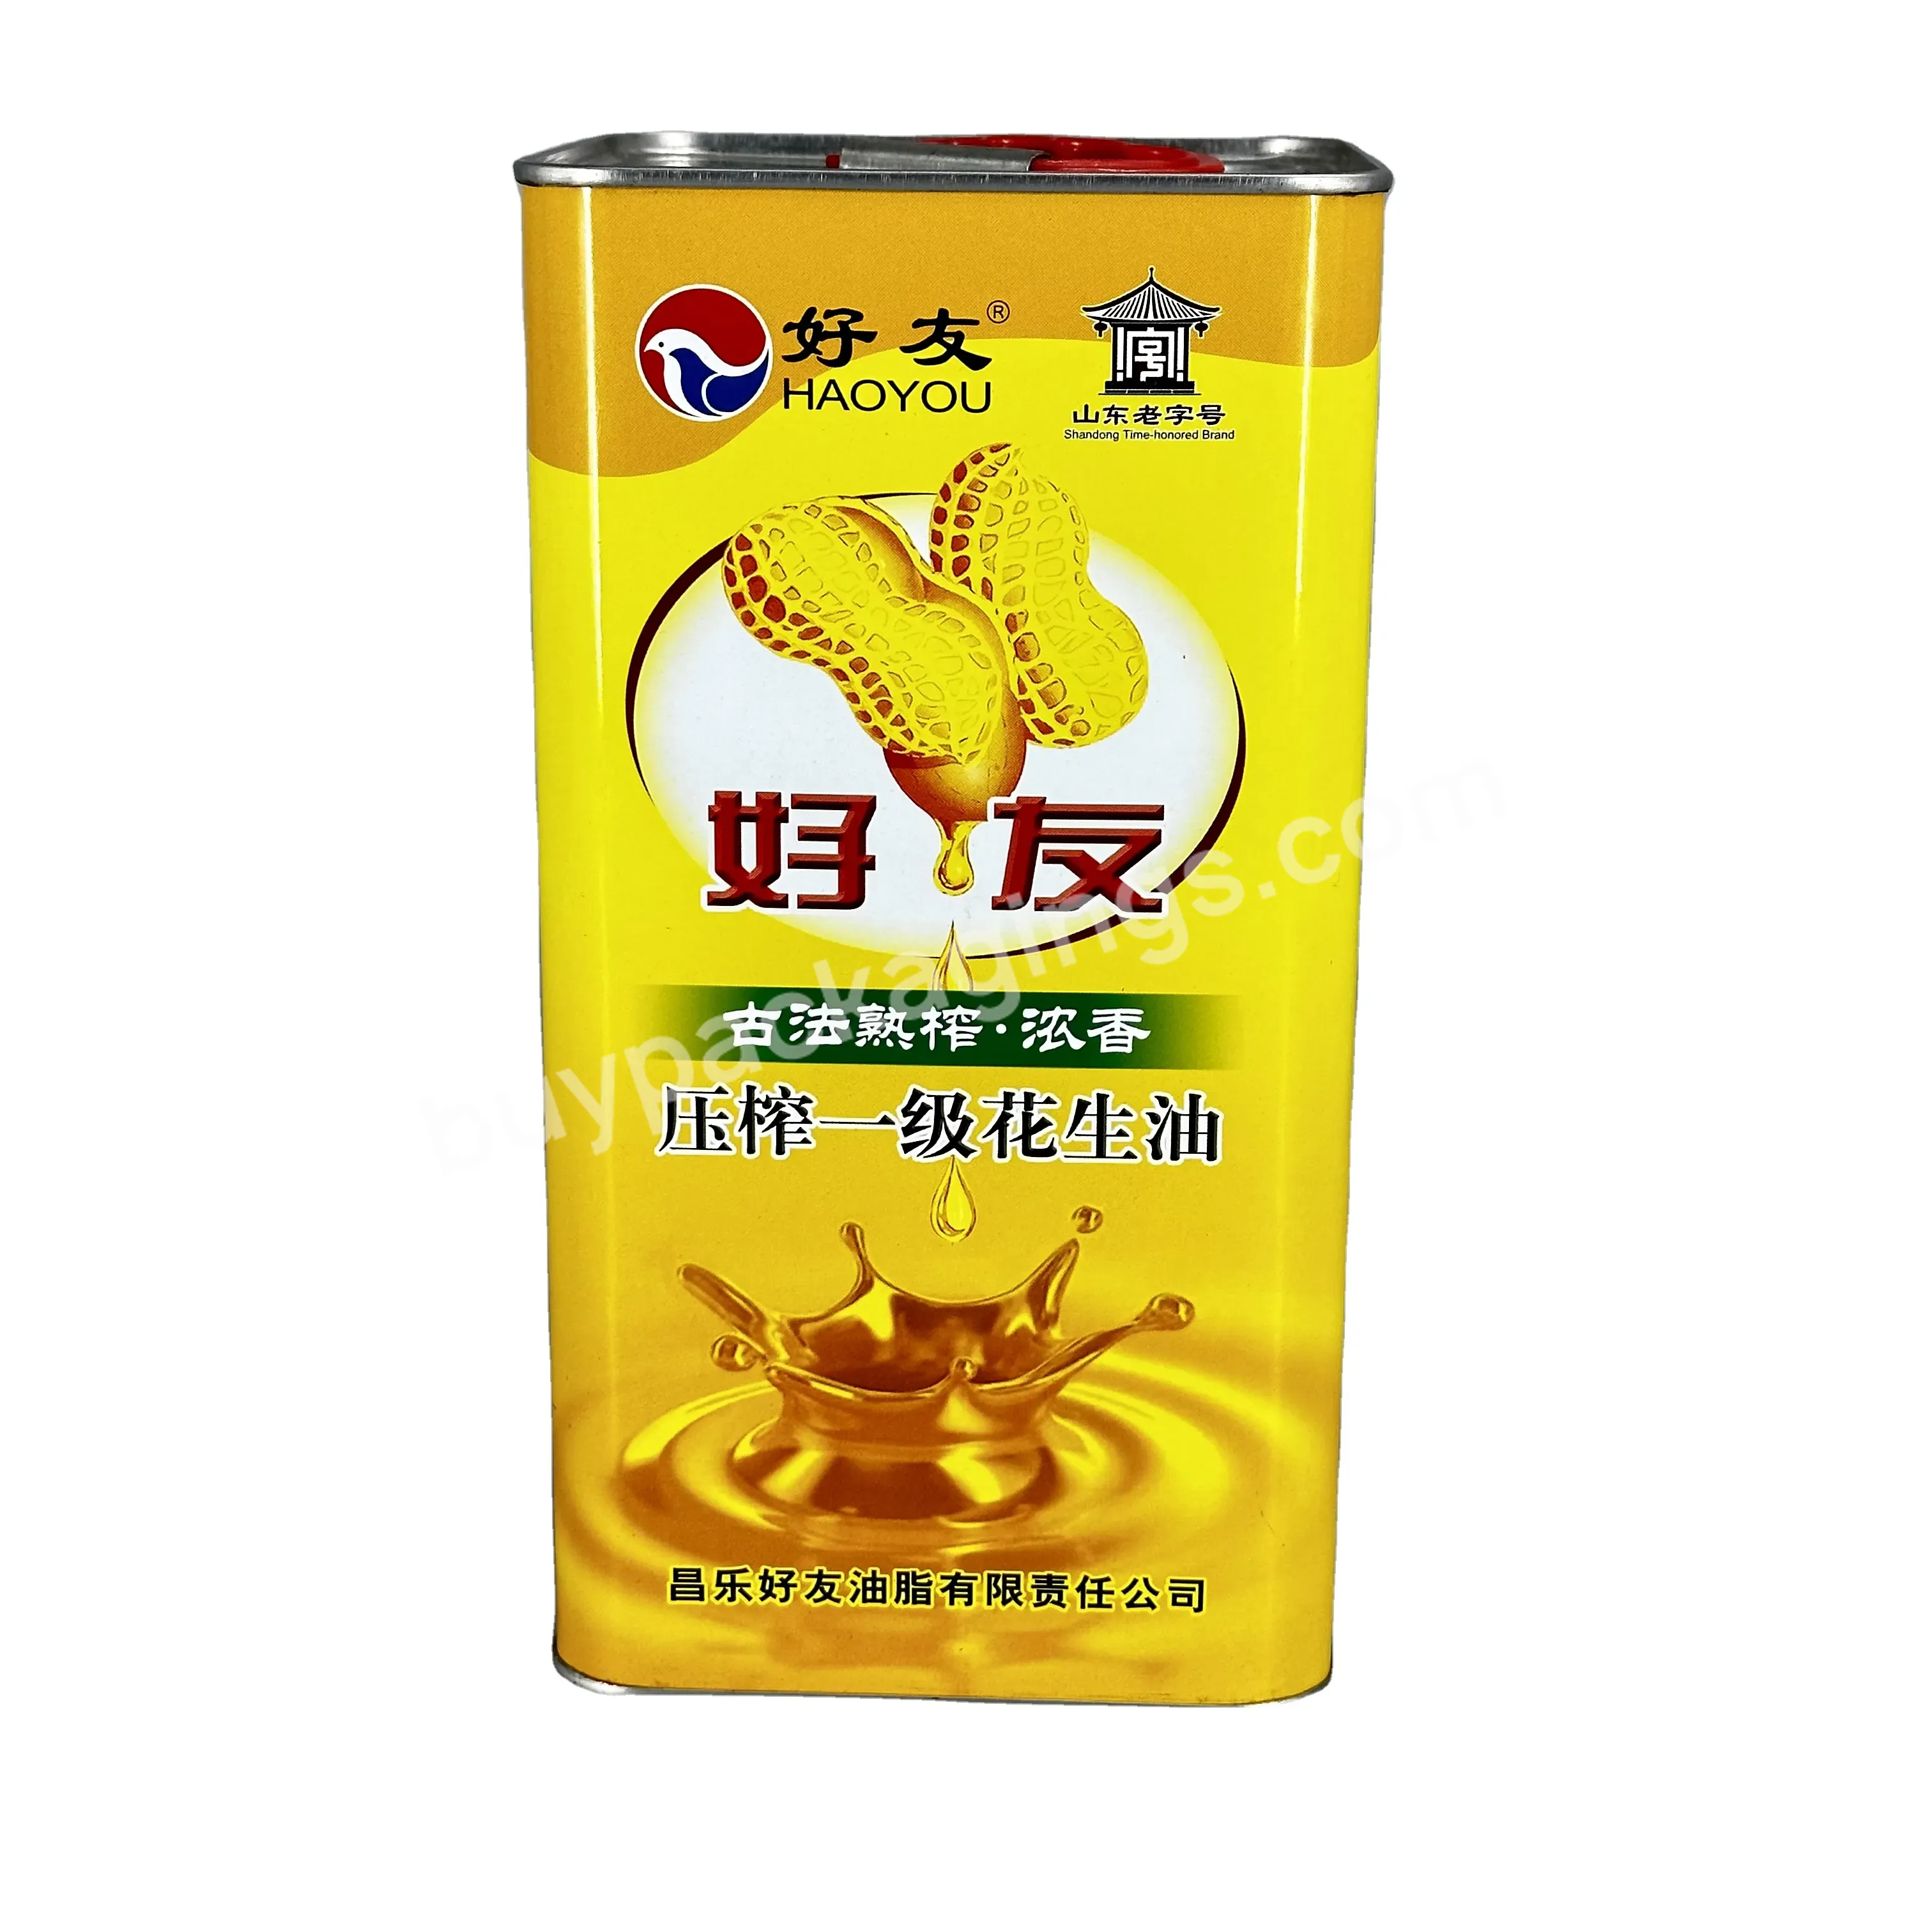 2023 Newest 2.5l Square Cooking Oil/olive Oil Tin Can Tin Cans For Food Canning With Plastic Handle And Spout Lid